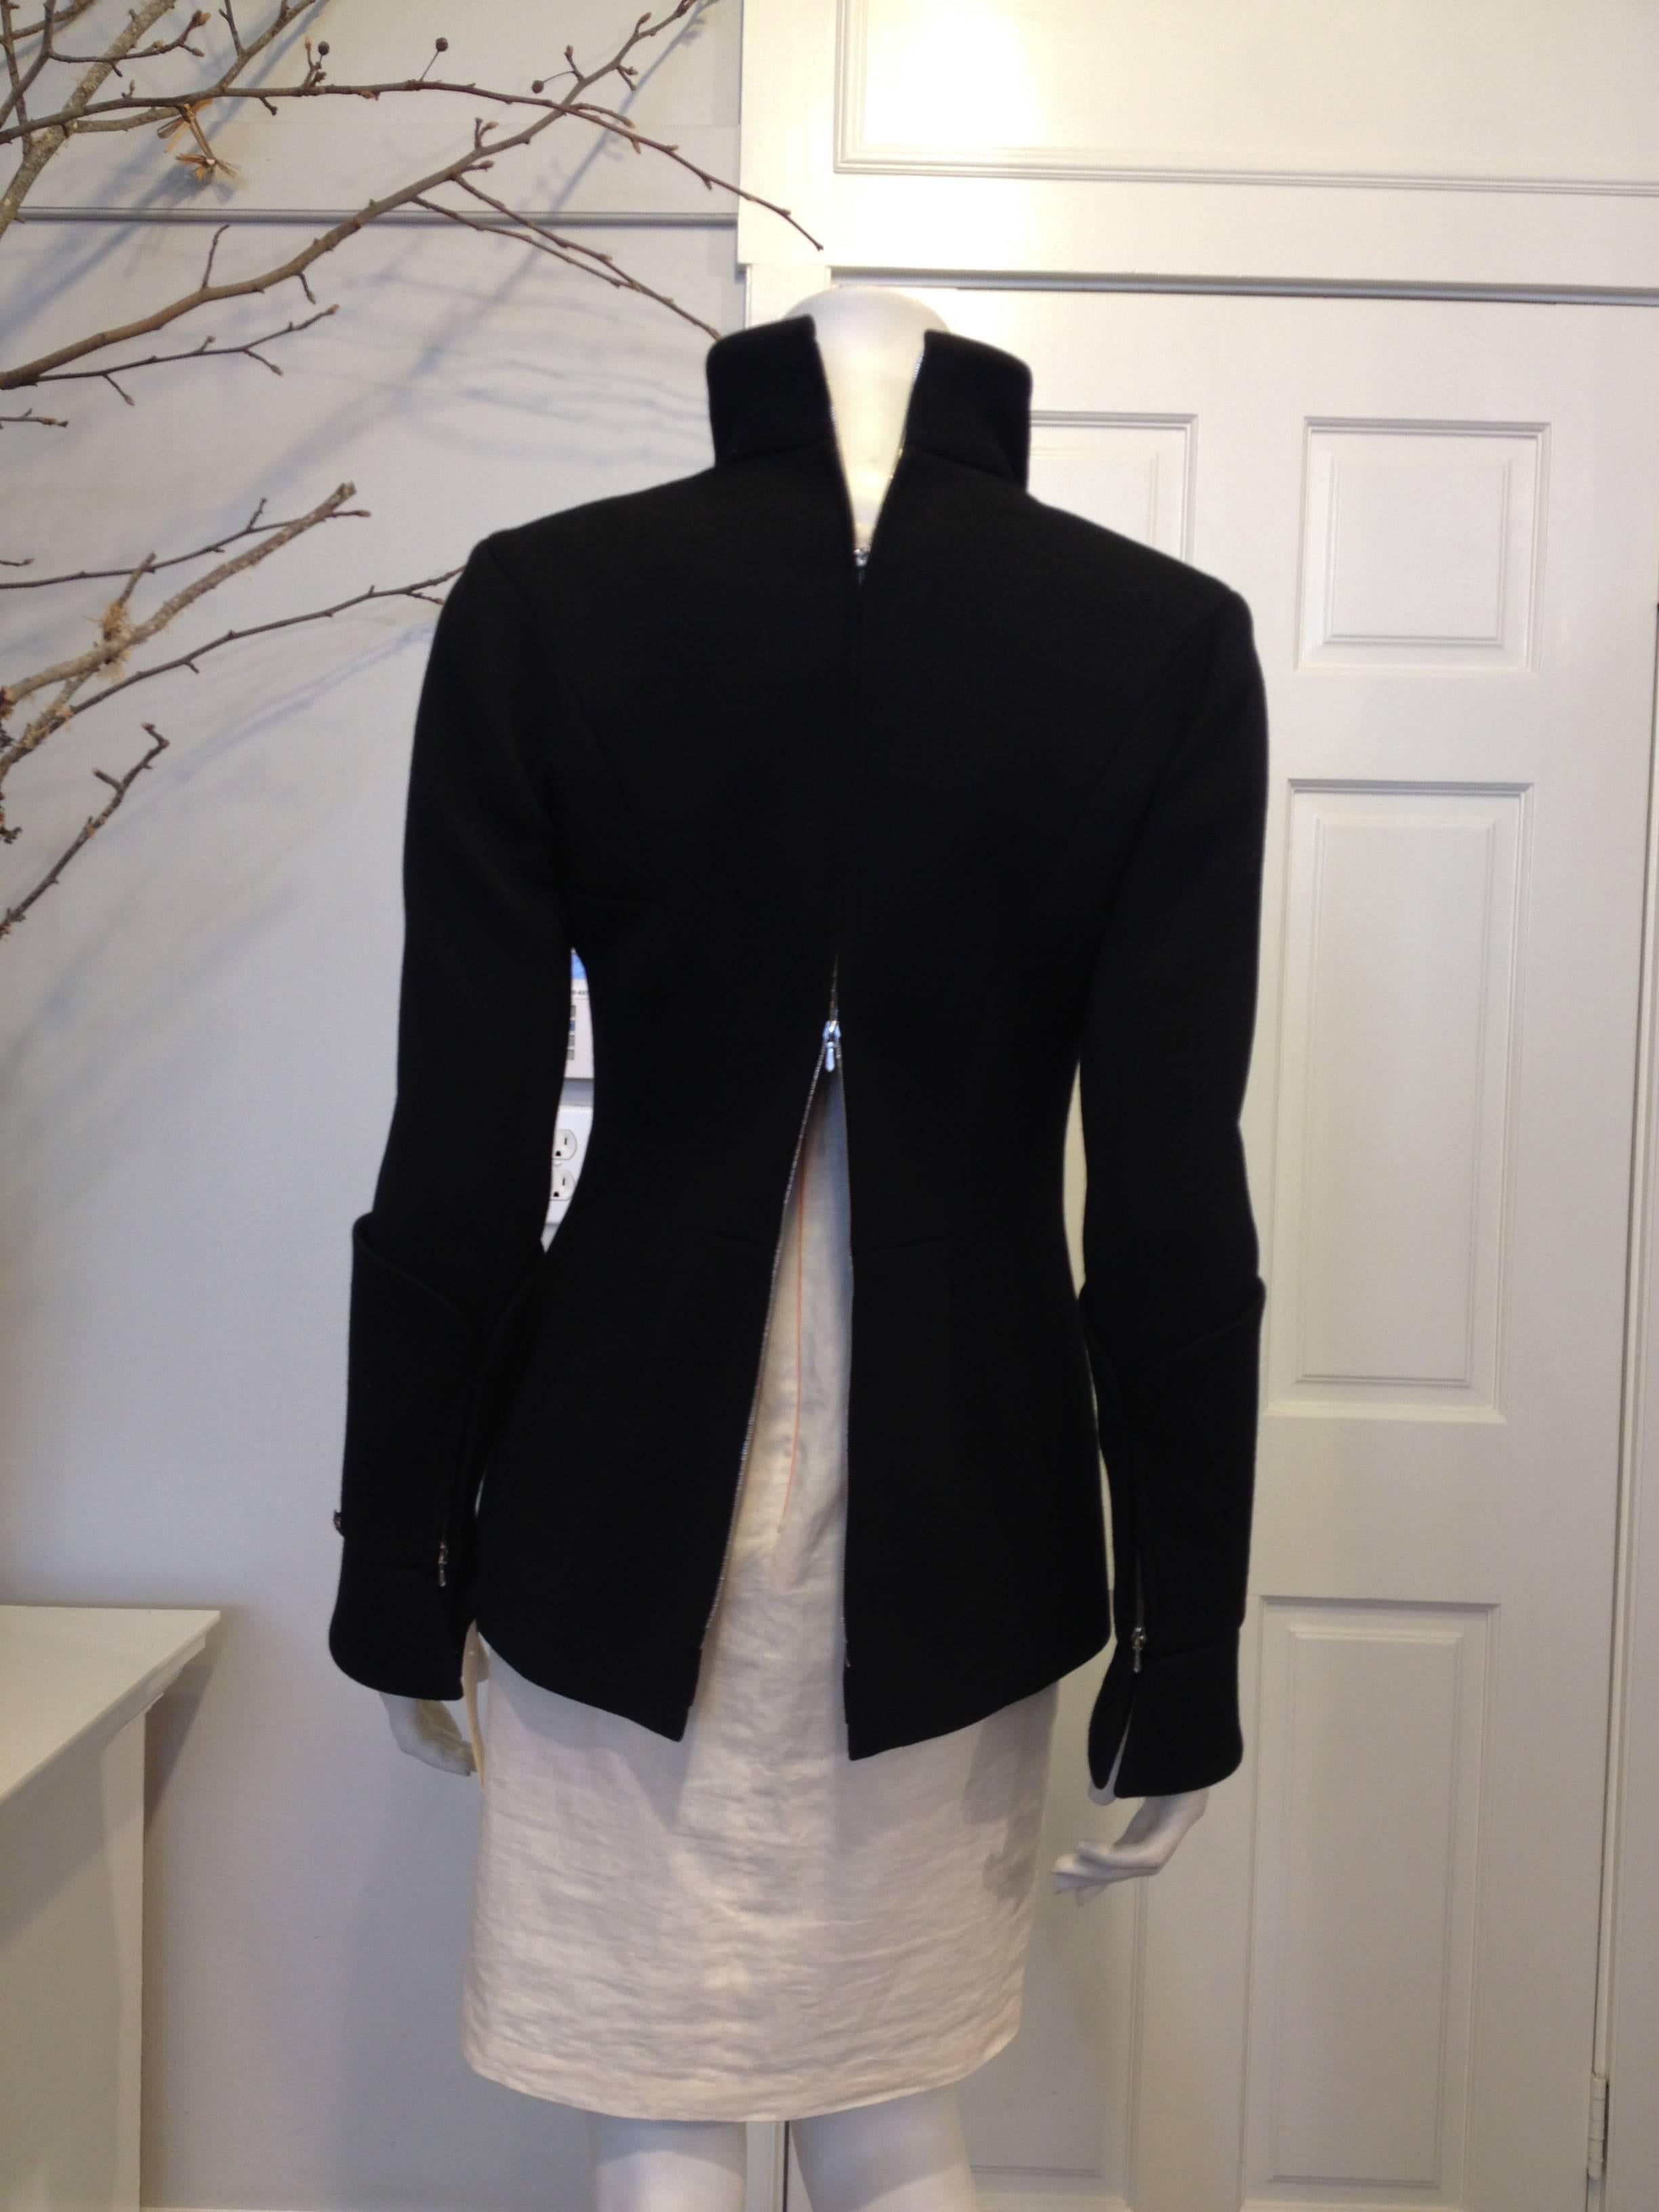 Chanel Black Jacket with Zippers Size 36 (4) For Sale 1